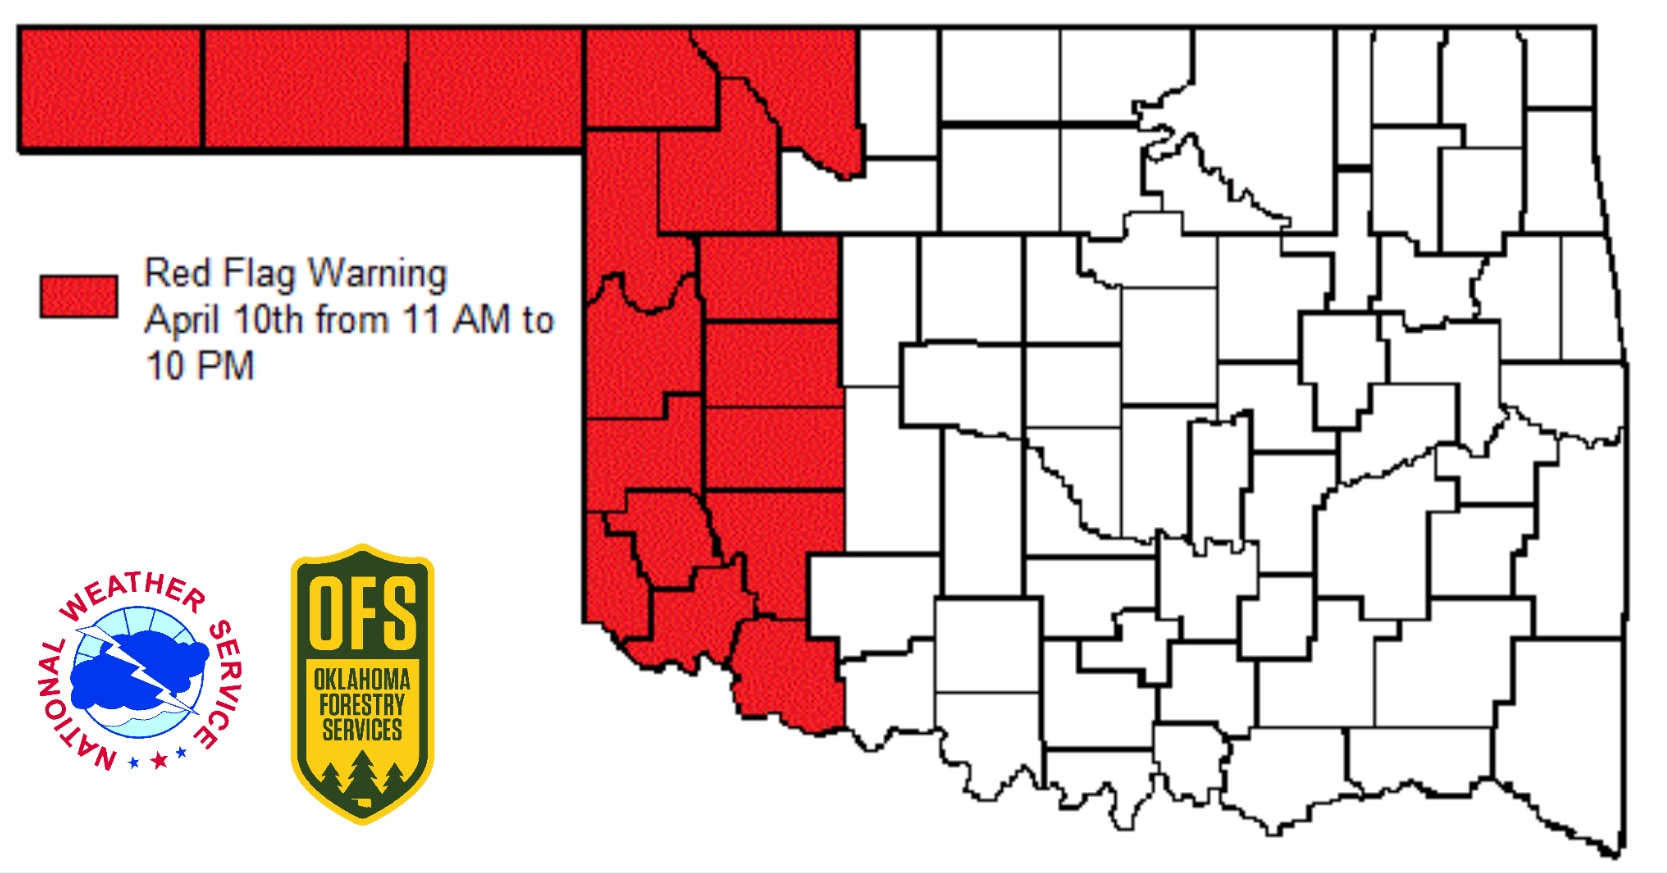 Red Flag Warning Issued for Western Oklahoma by State Forestry ServicesAmid Extreme Fire Danger